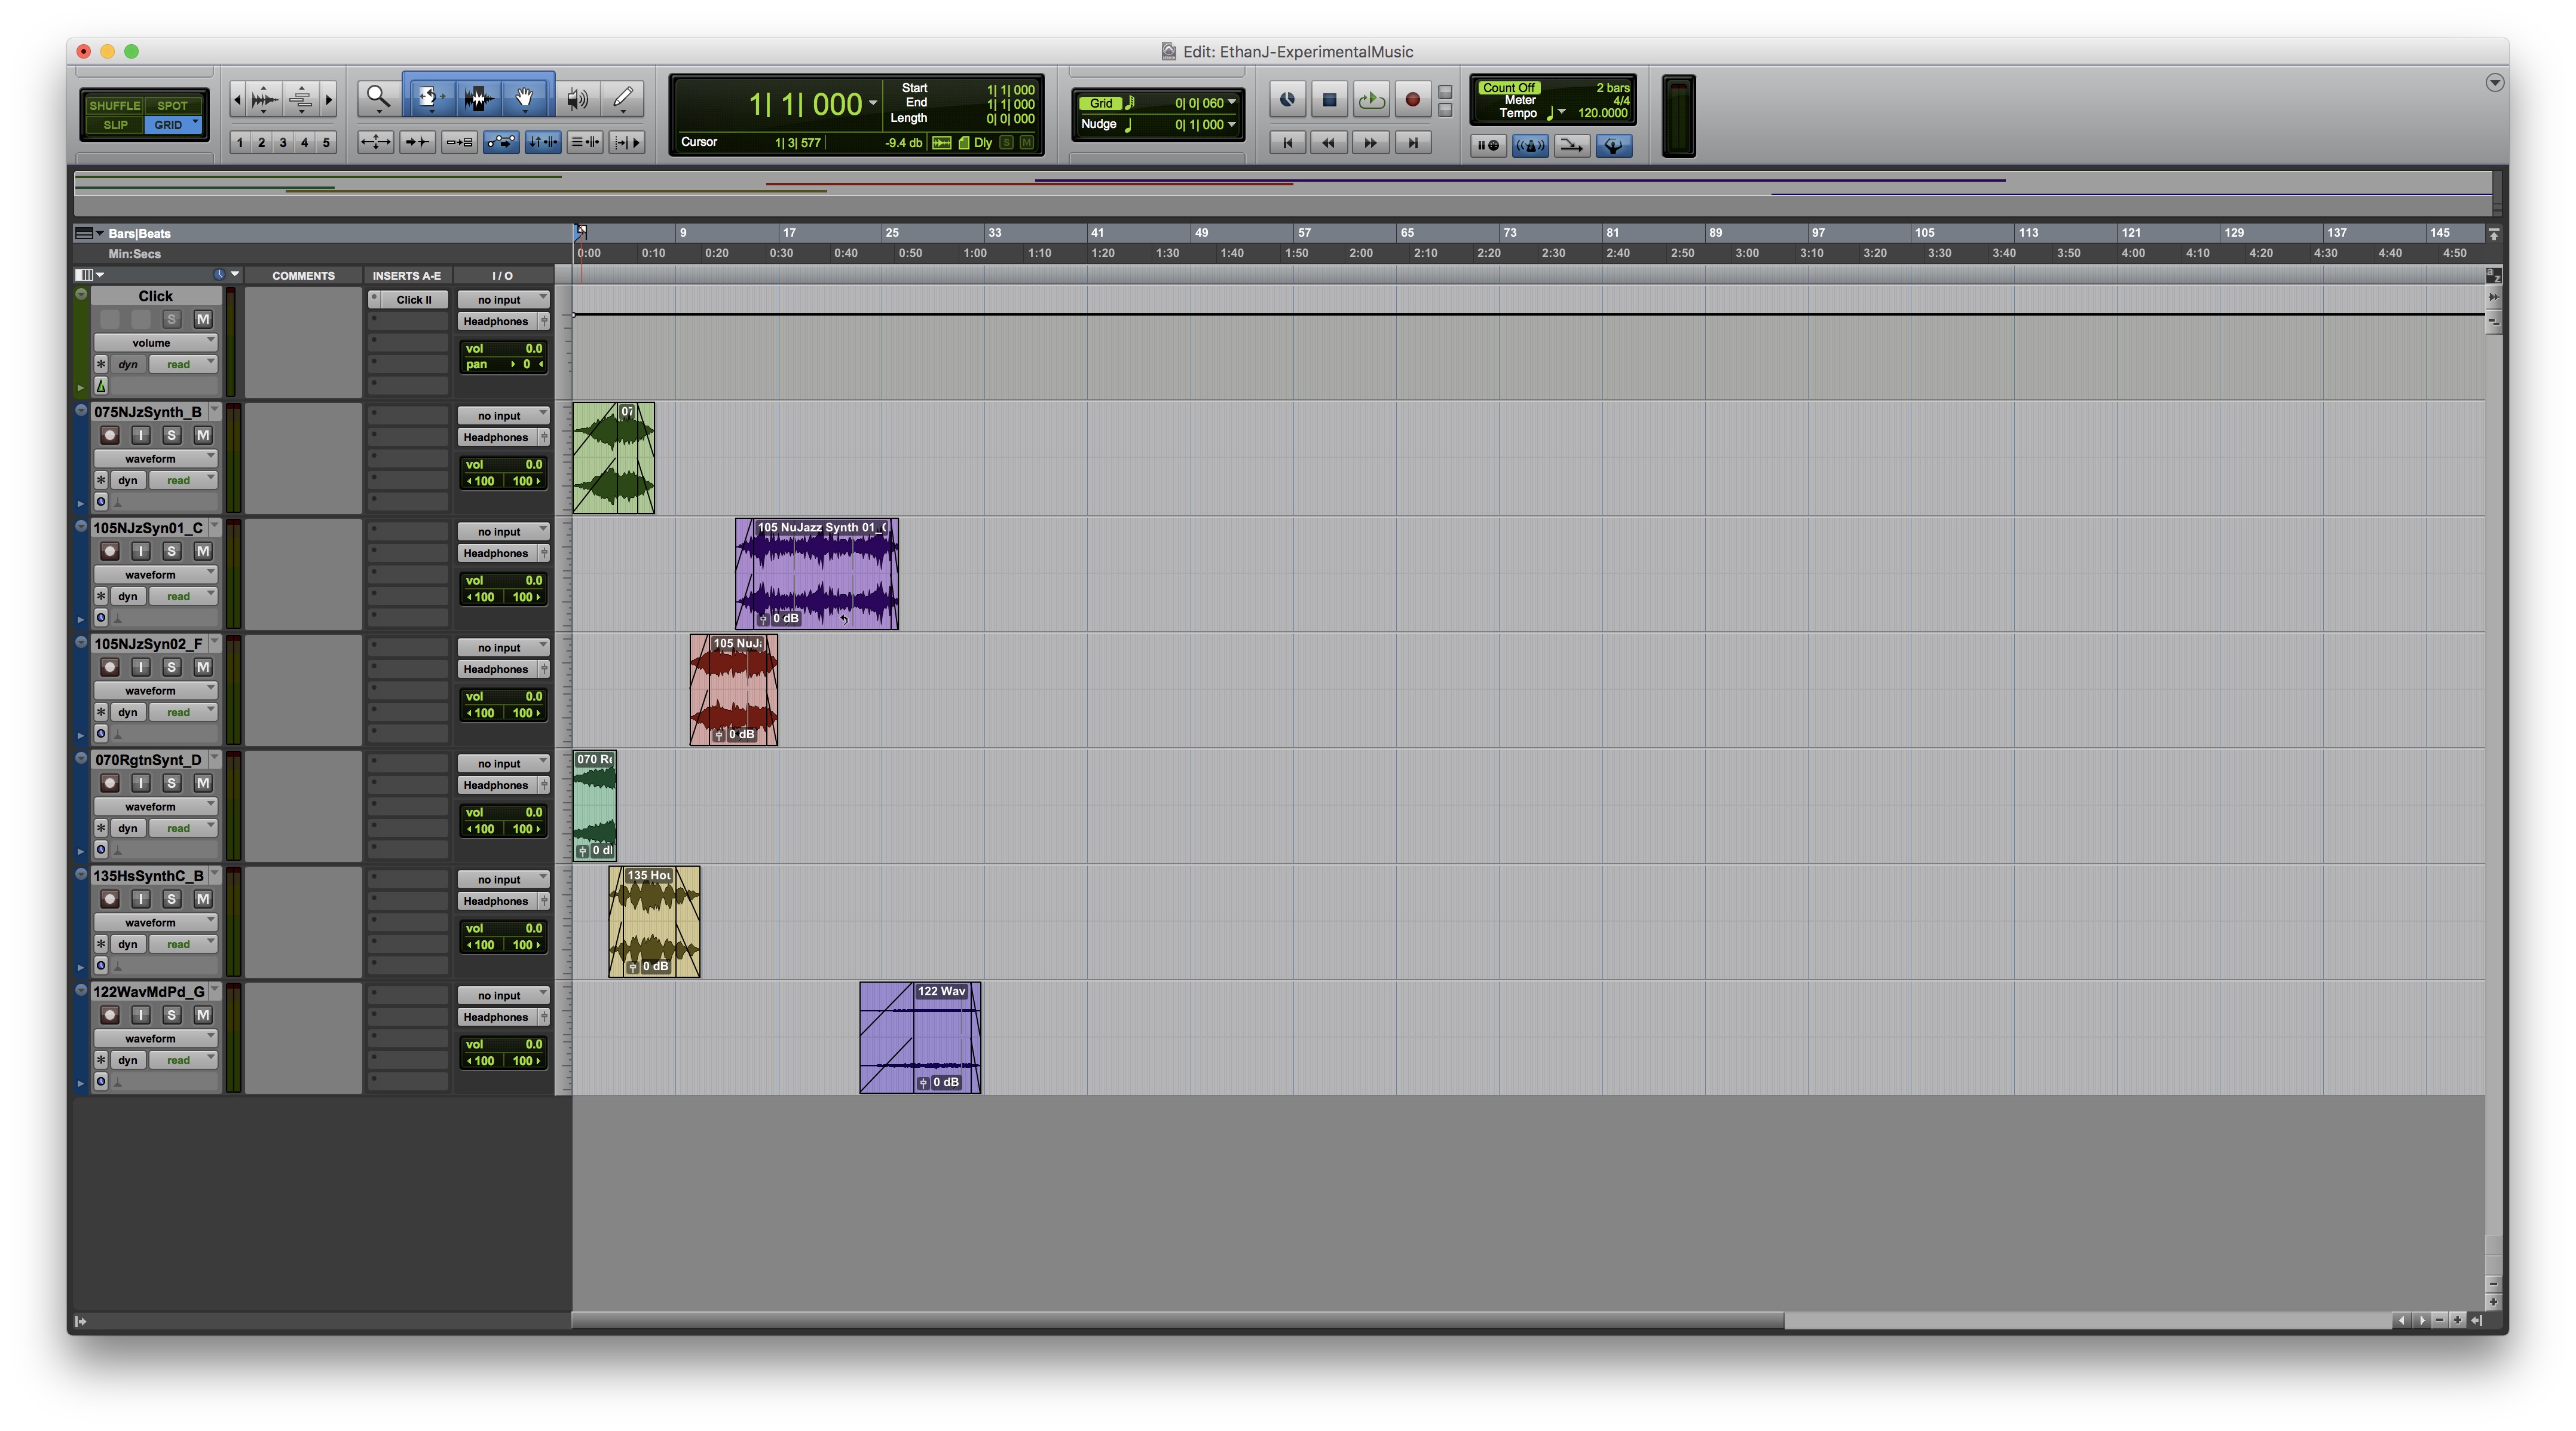 Screenshot of Pro Tools file that I used for my experimental music.